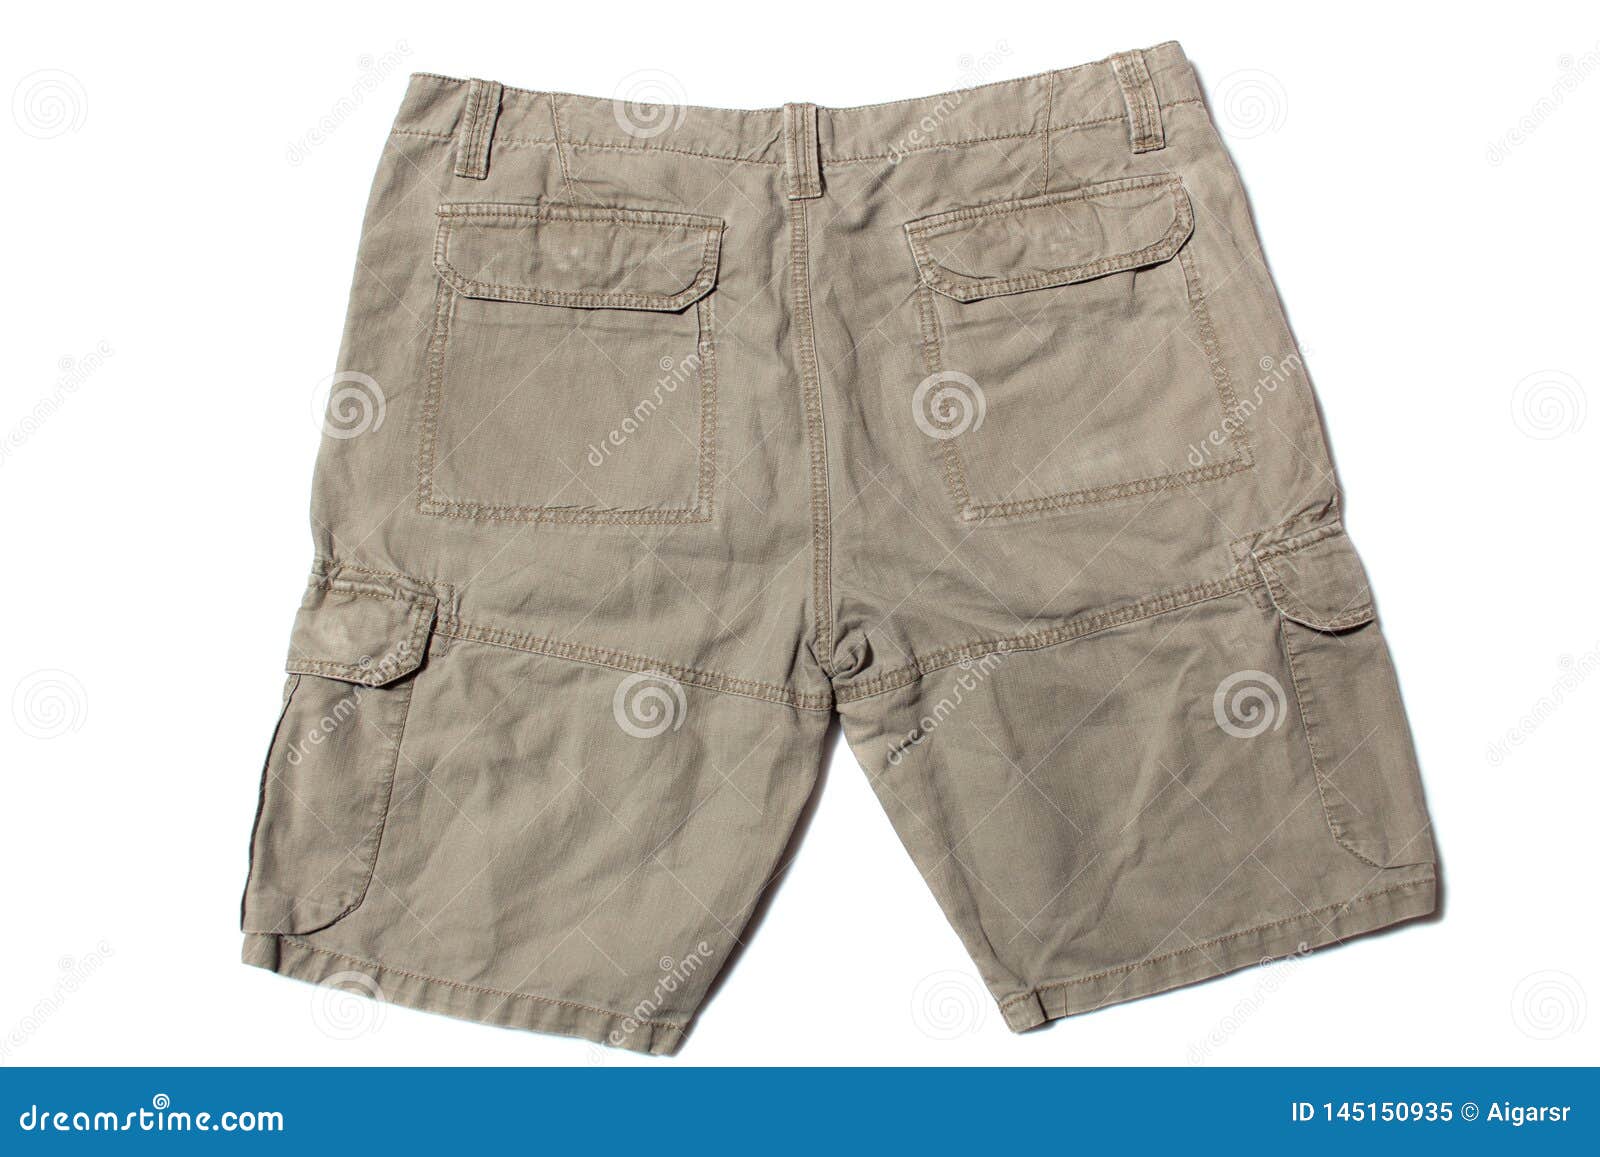 Linen cargo shorts stock image. Image of back, casual - 145150935